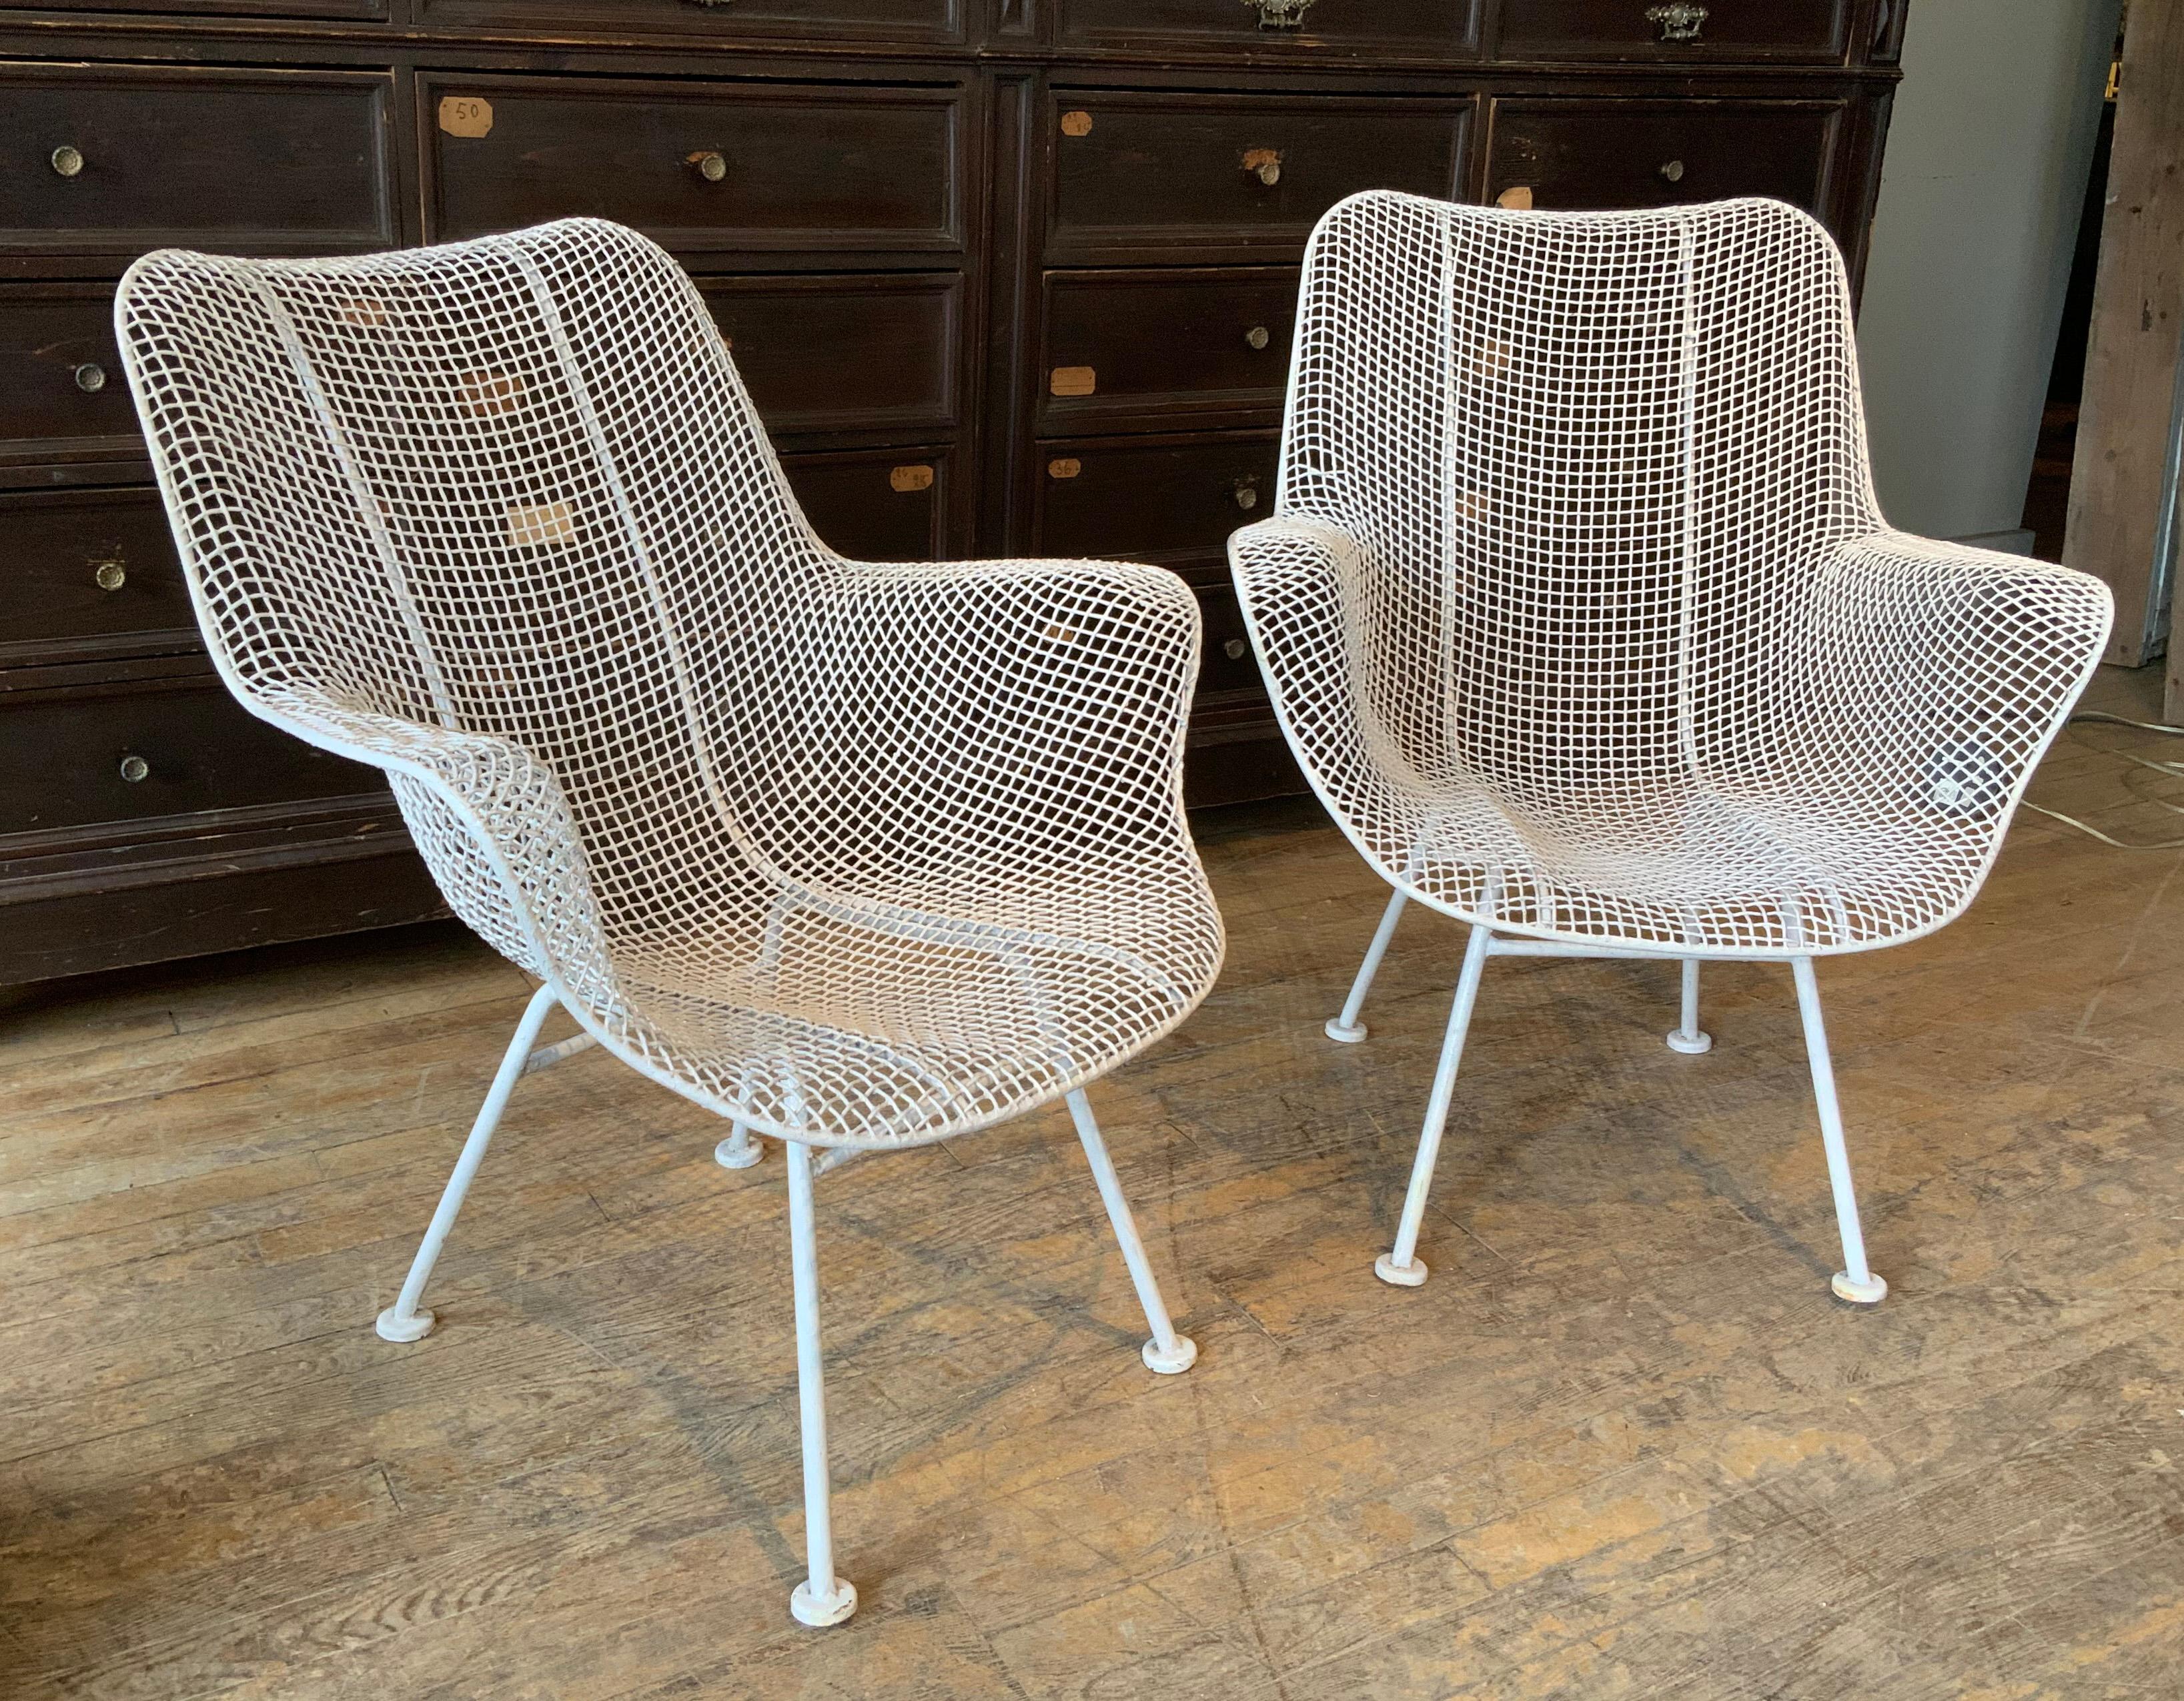 A pair of 1950s midcentury Woodard Sculptura high back lounge chairs, in their original white finish. Comfortable and stylish, beautiful examples of these Classic chairs. Sculptura was Russell Woodard's most iconic collection from the 1950s, with